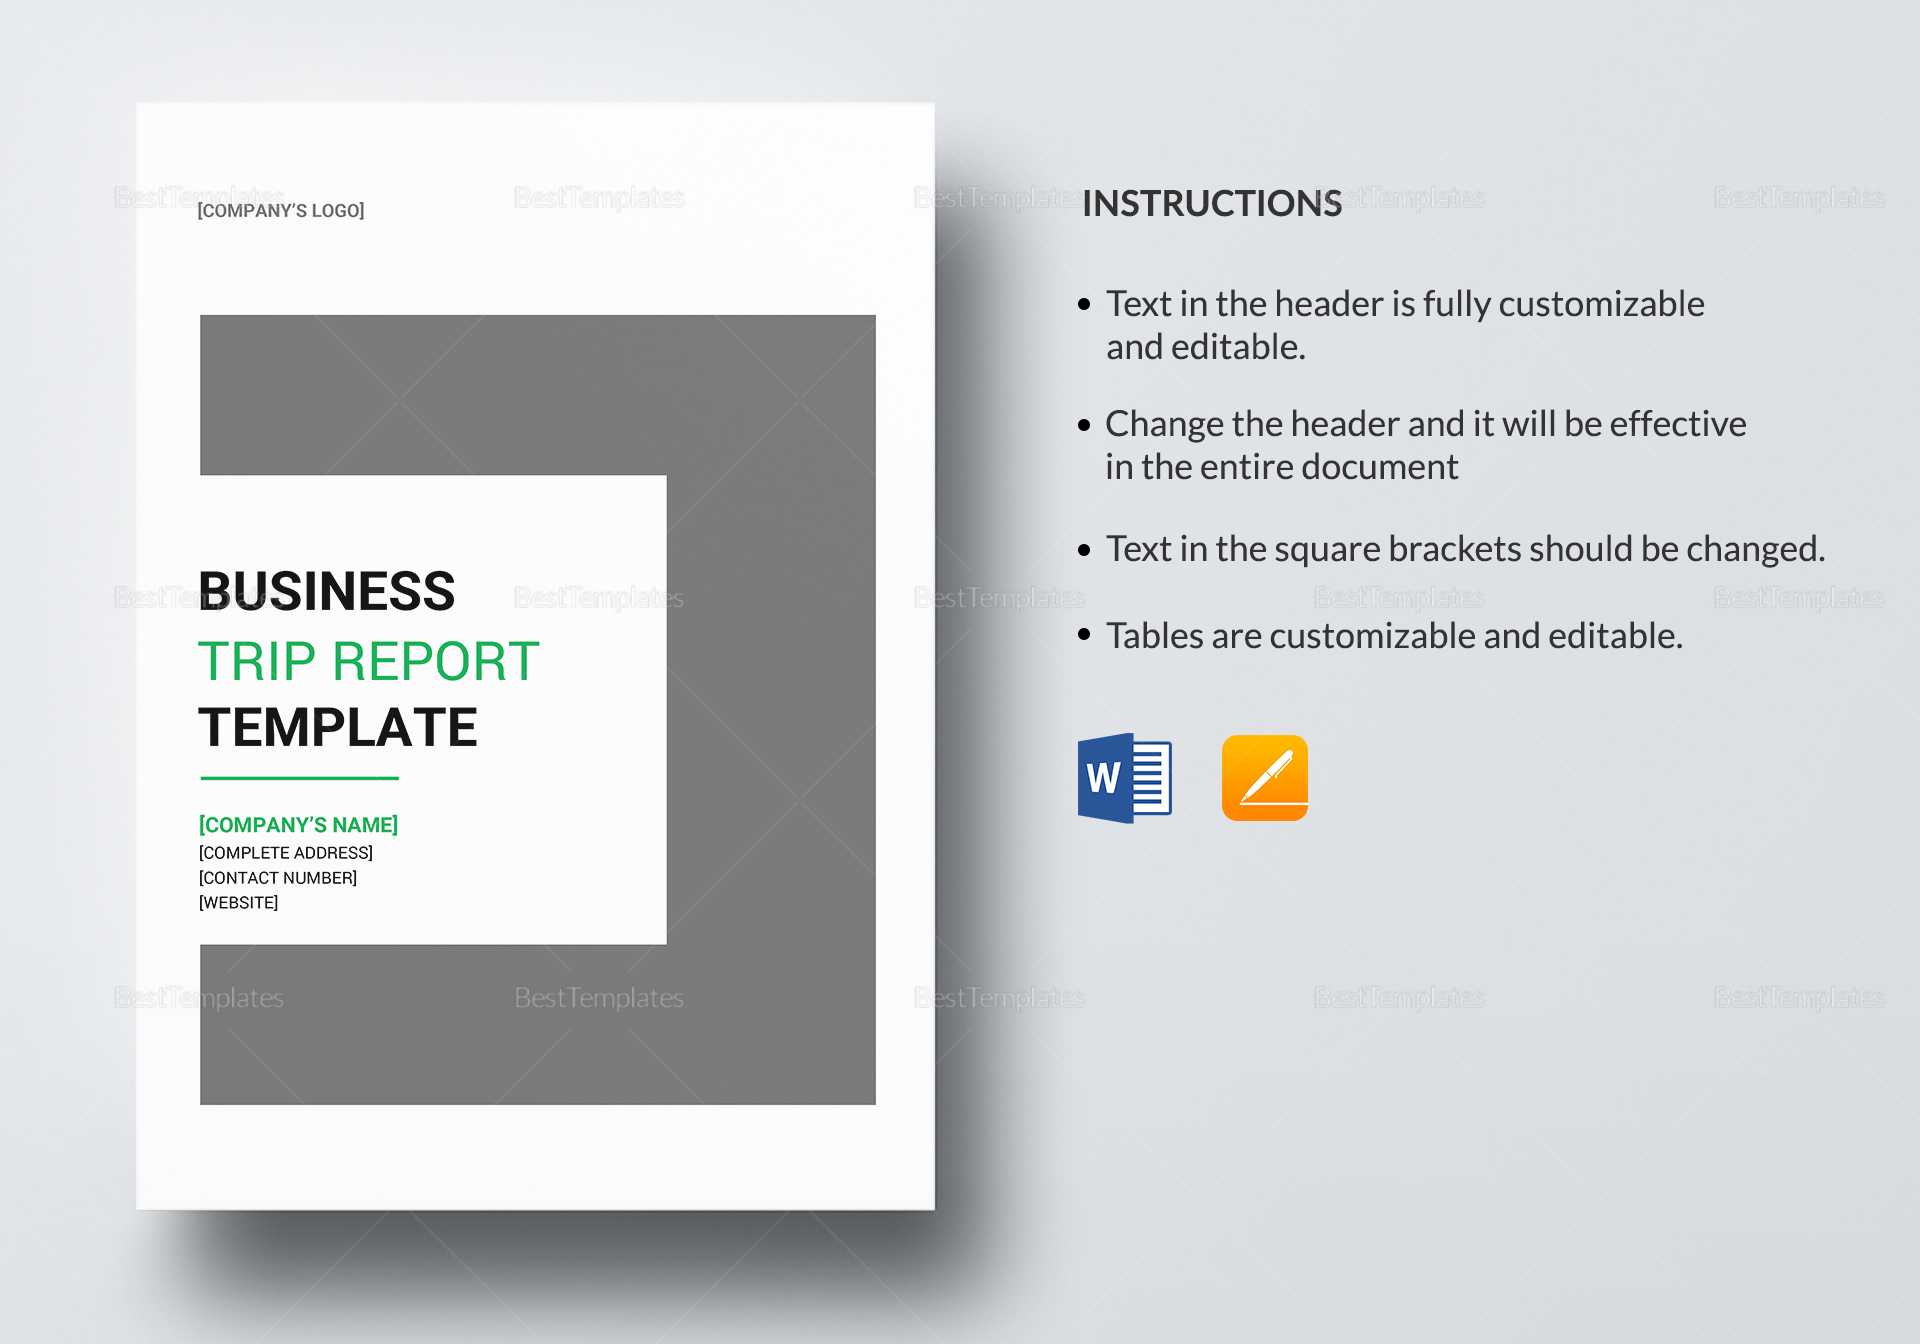 Business Trip Report Template In Business Trip Report Template